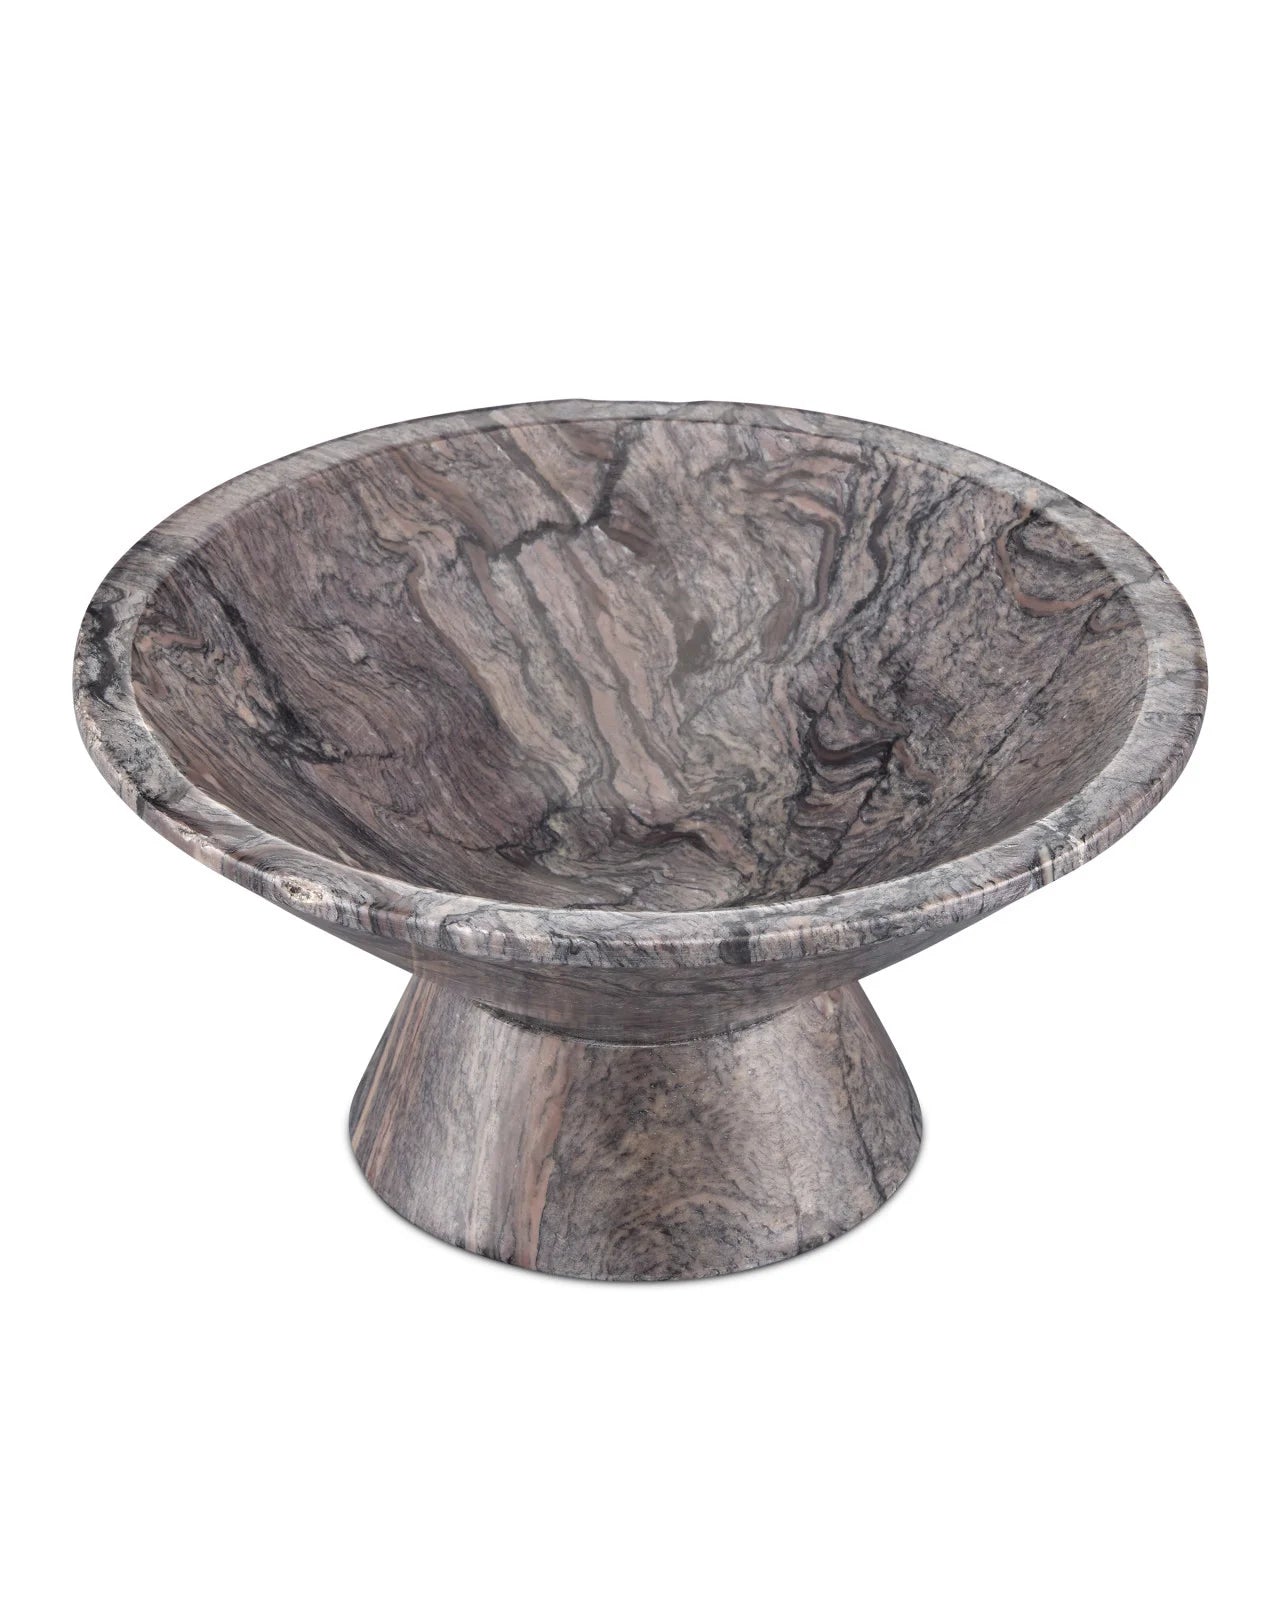 BOWL PEDESTAL BRECCIA MARBLE (Available in 2 Sizes)